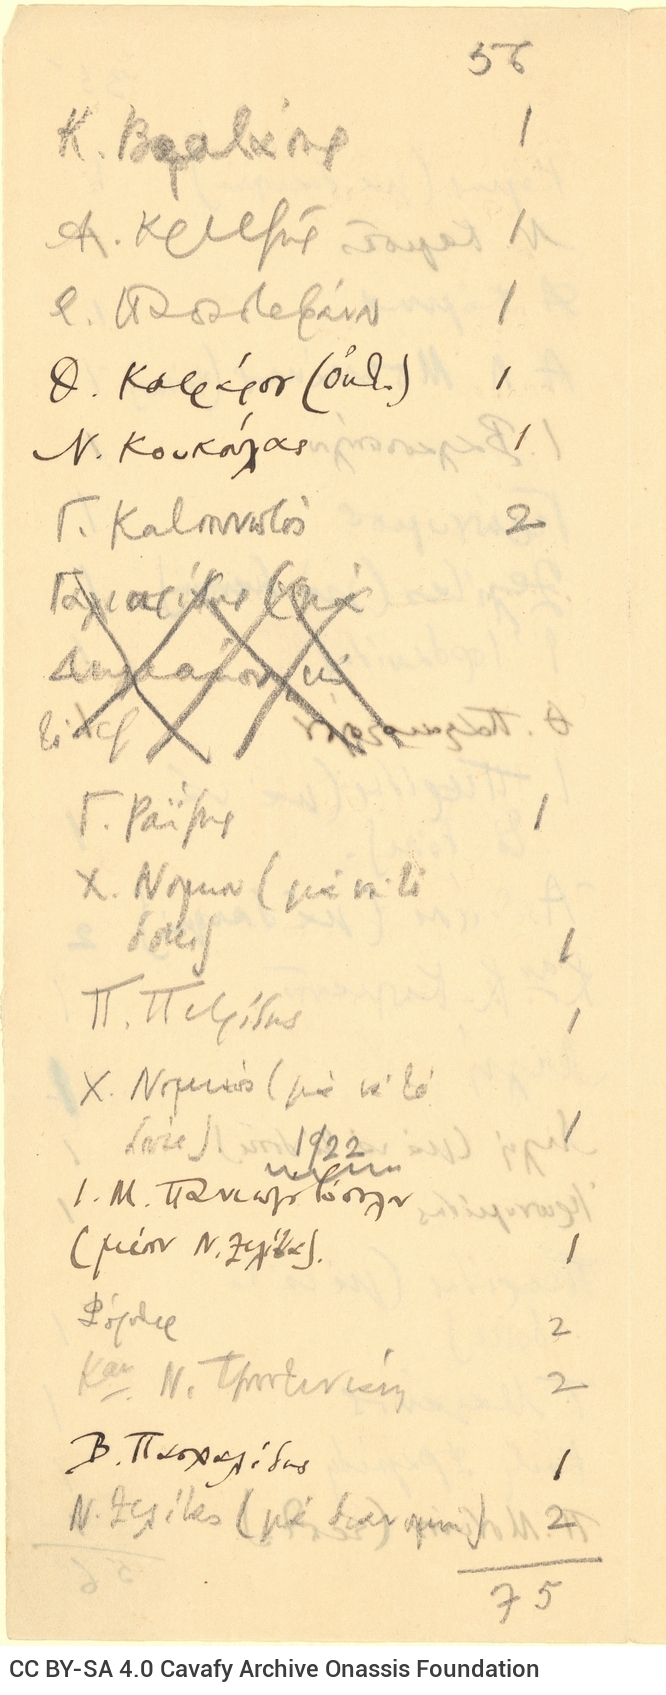 Handwritten list for the distribution of the 1915 onwards Collection consisting of five sheets of paper, initially folded 